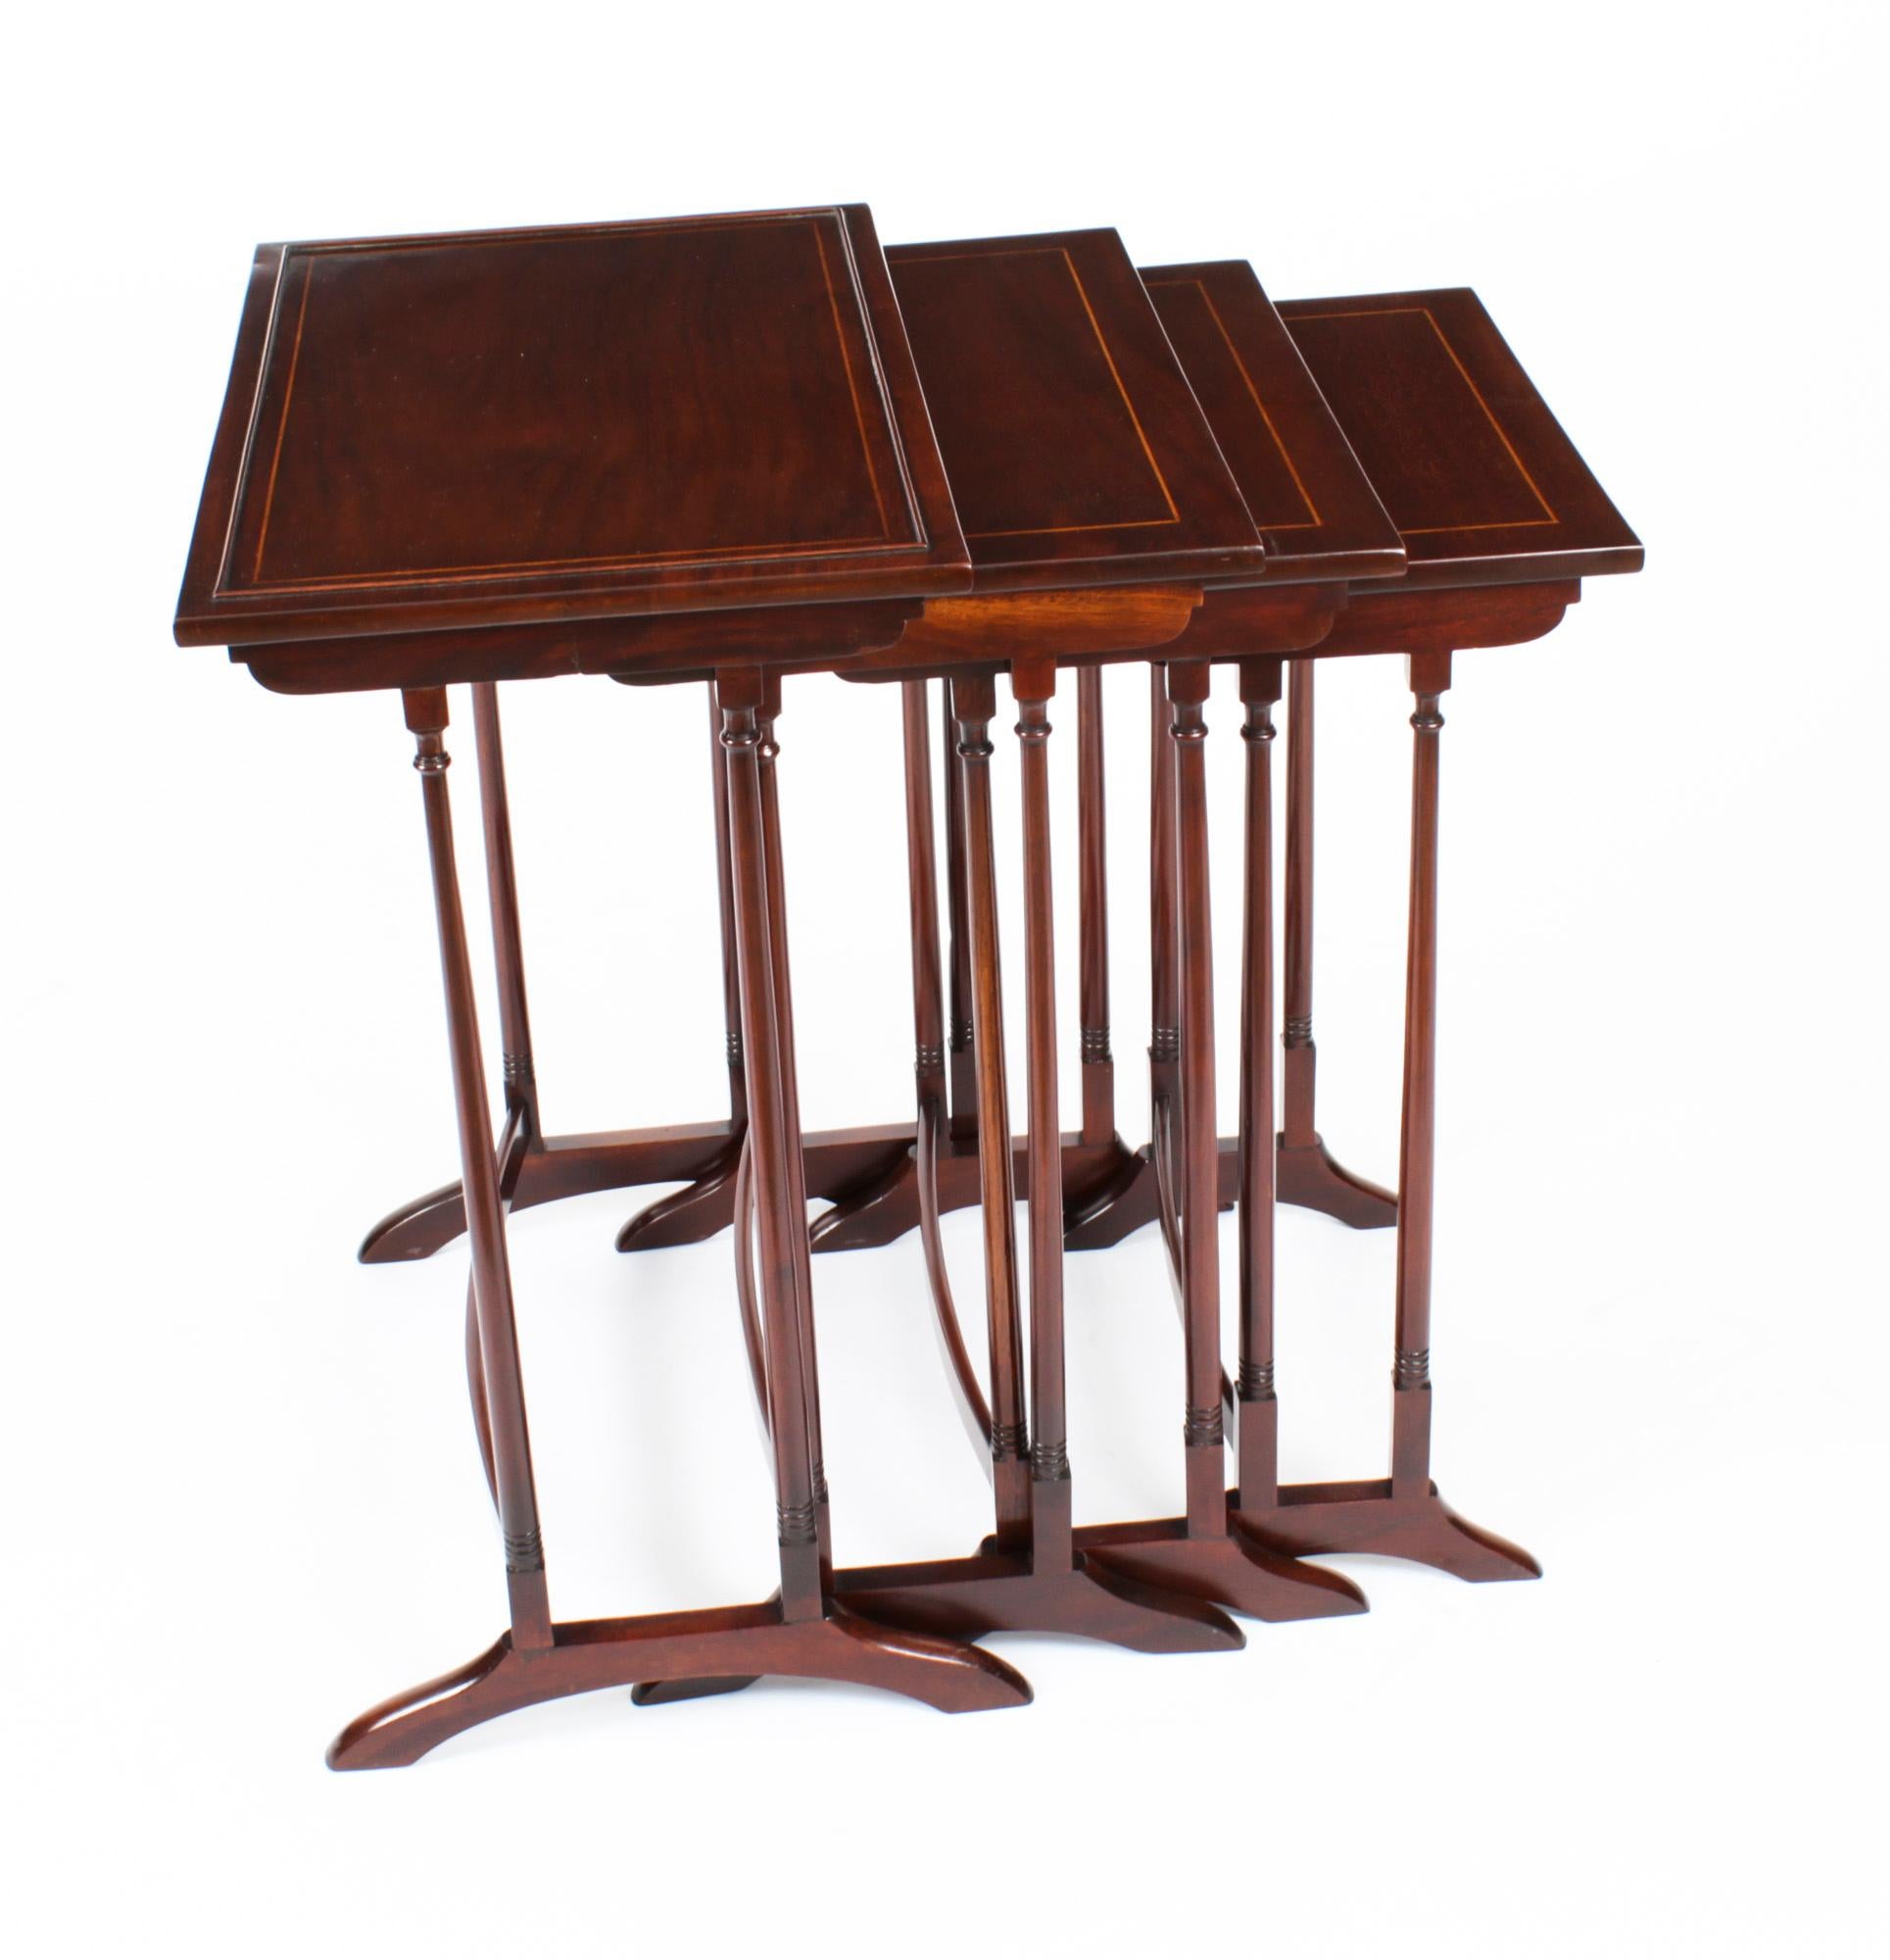 Antique Edwardian Mahogany Nest of Four Tables Early 20th Century In Good Condition For Sale In London, GB